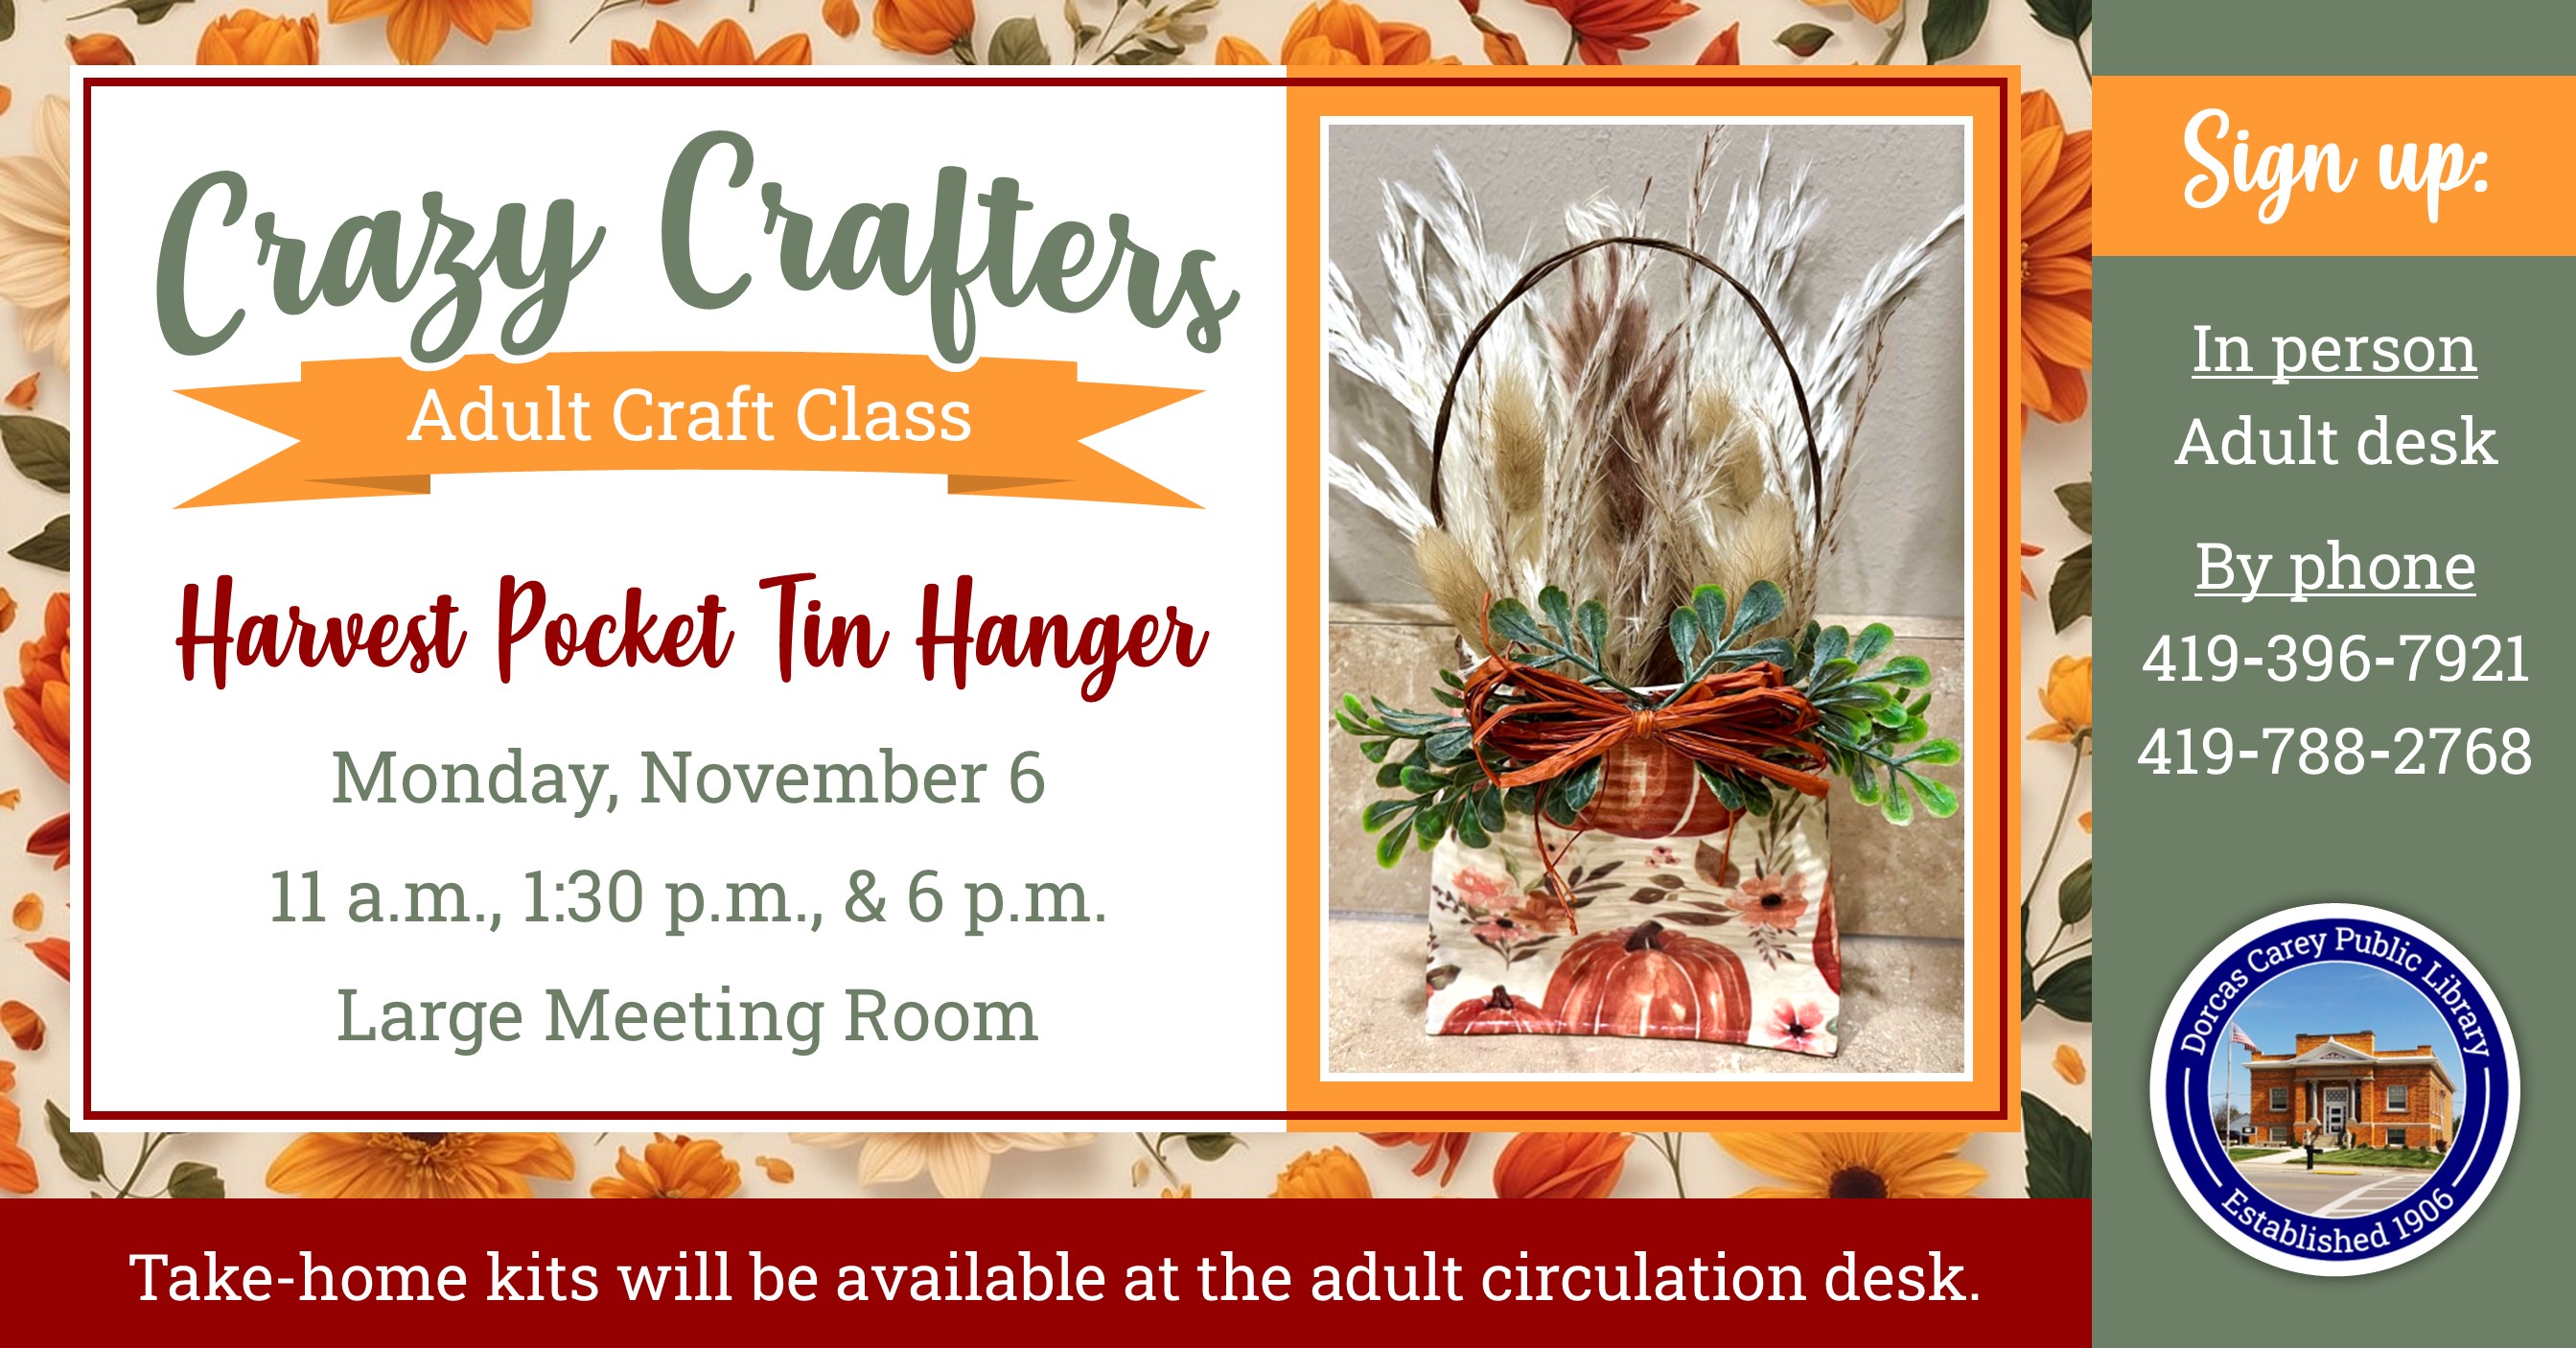 Enjoy the laughter and crafty company on Monday, November 6th at 11 a.m., 1:30 p.m. & 6 p.m.  Discover the creative side of yourself and have fun!  Supplies are provided free of charge, but donations are welcome!!  This month’s craft is a Harvest Pocket Tin Holder.  Please sign up at the adult circulation desk or by phone at 419-396-7921 or 419-788-2768. 